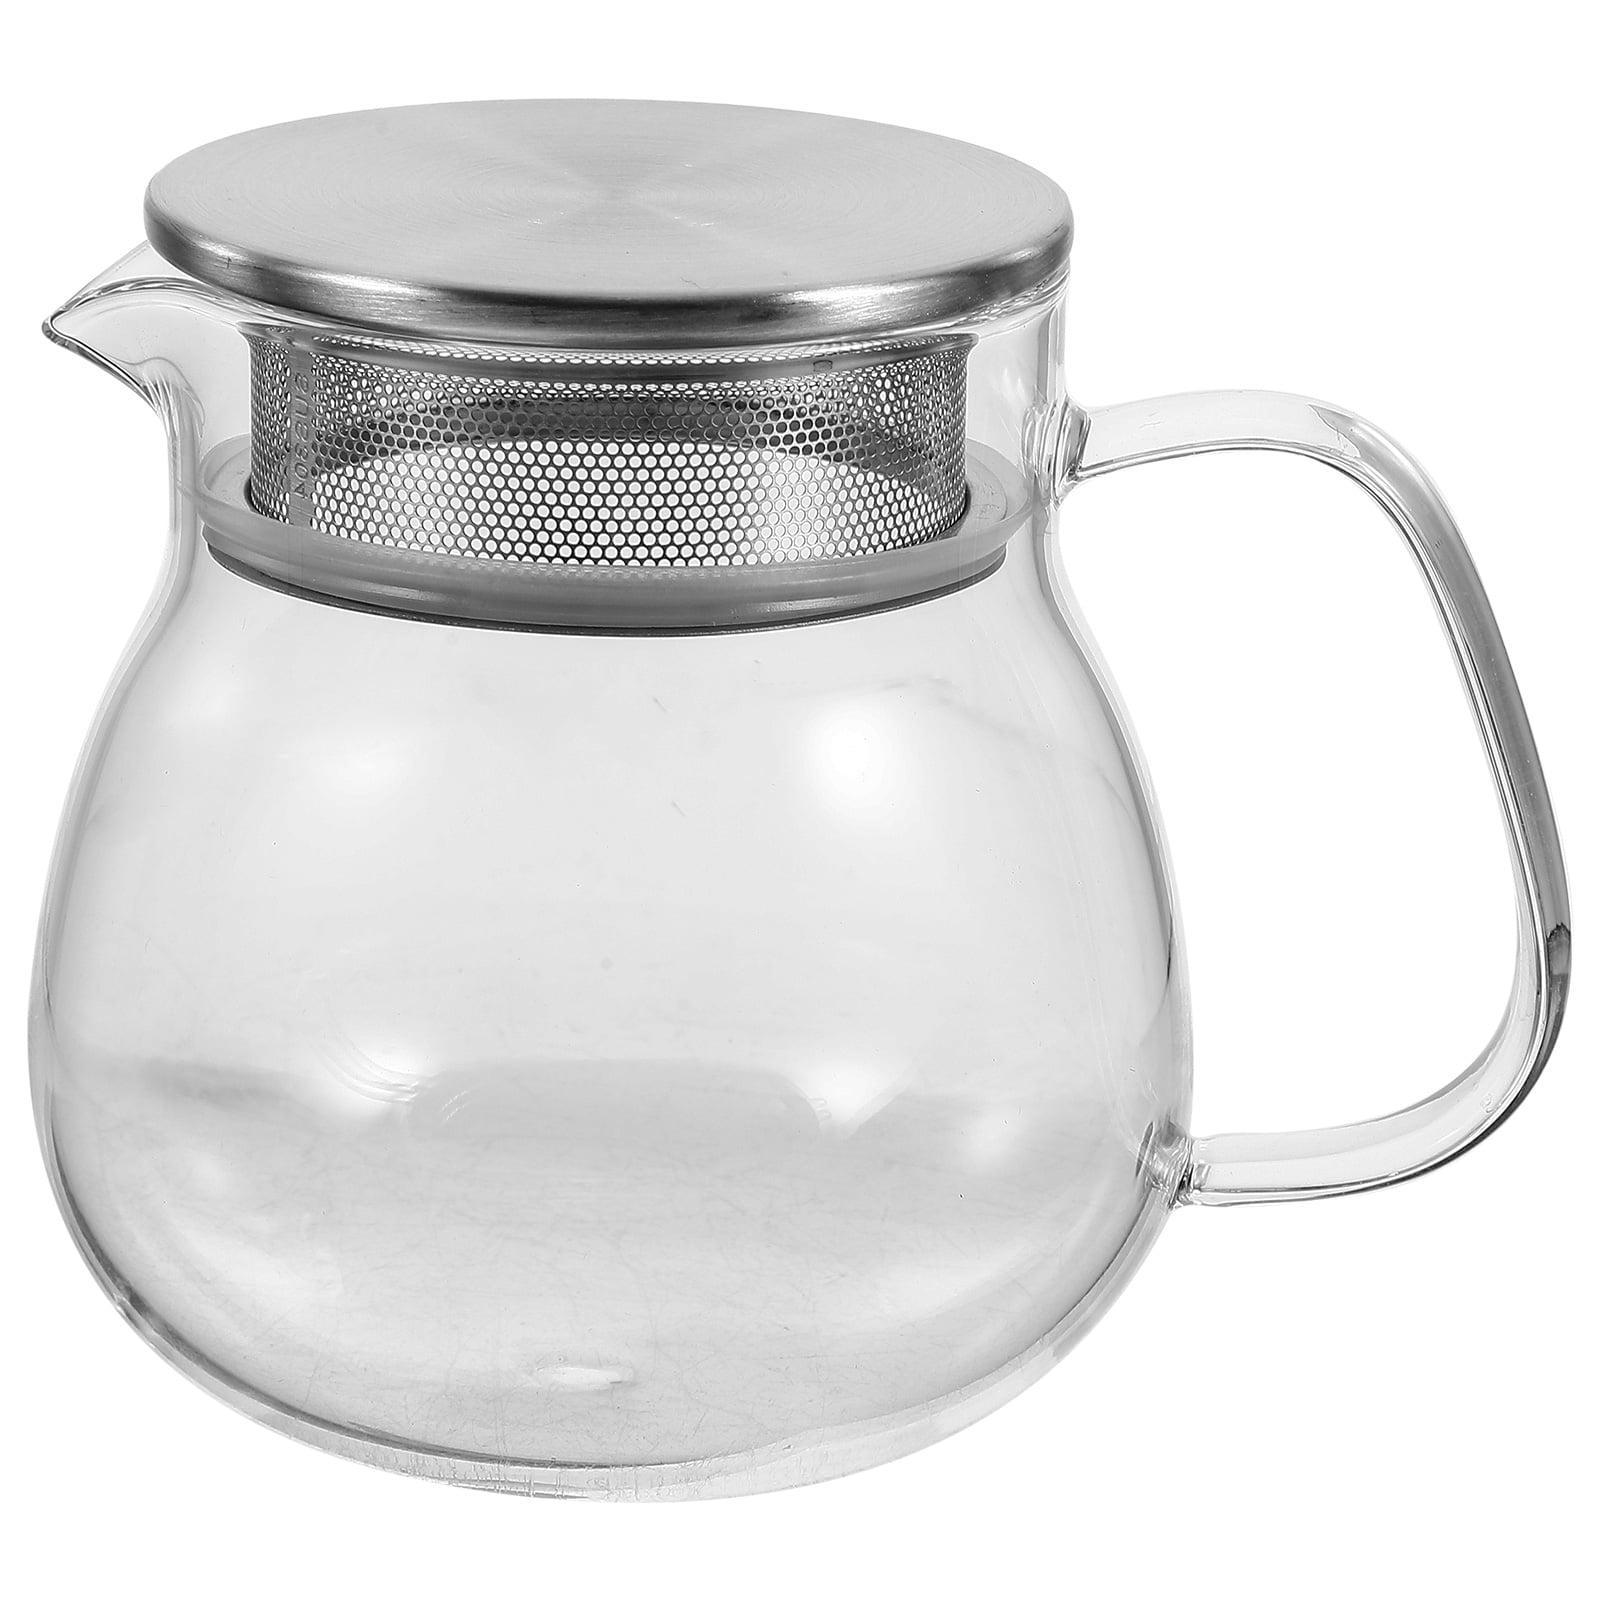 SANQIAHOME Small Stainless Steel Teapot (Silver 570 ml)